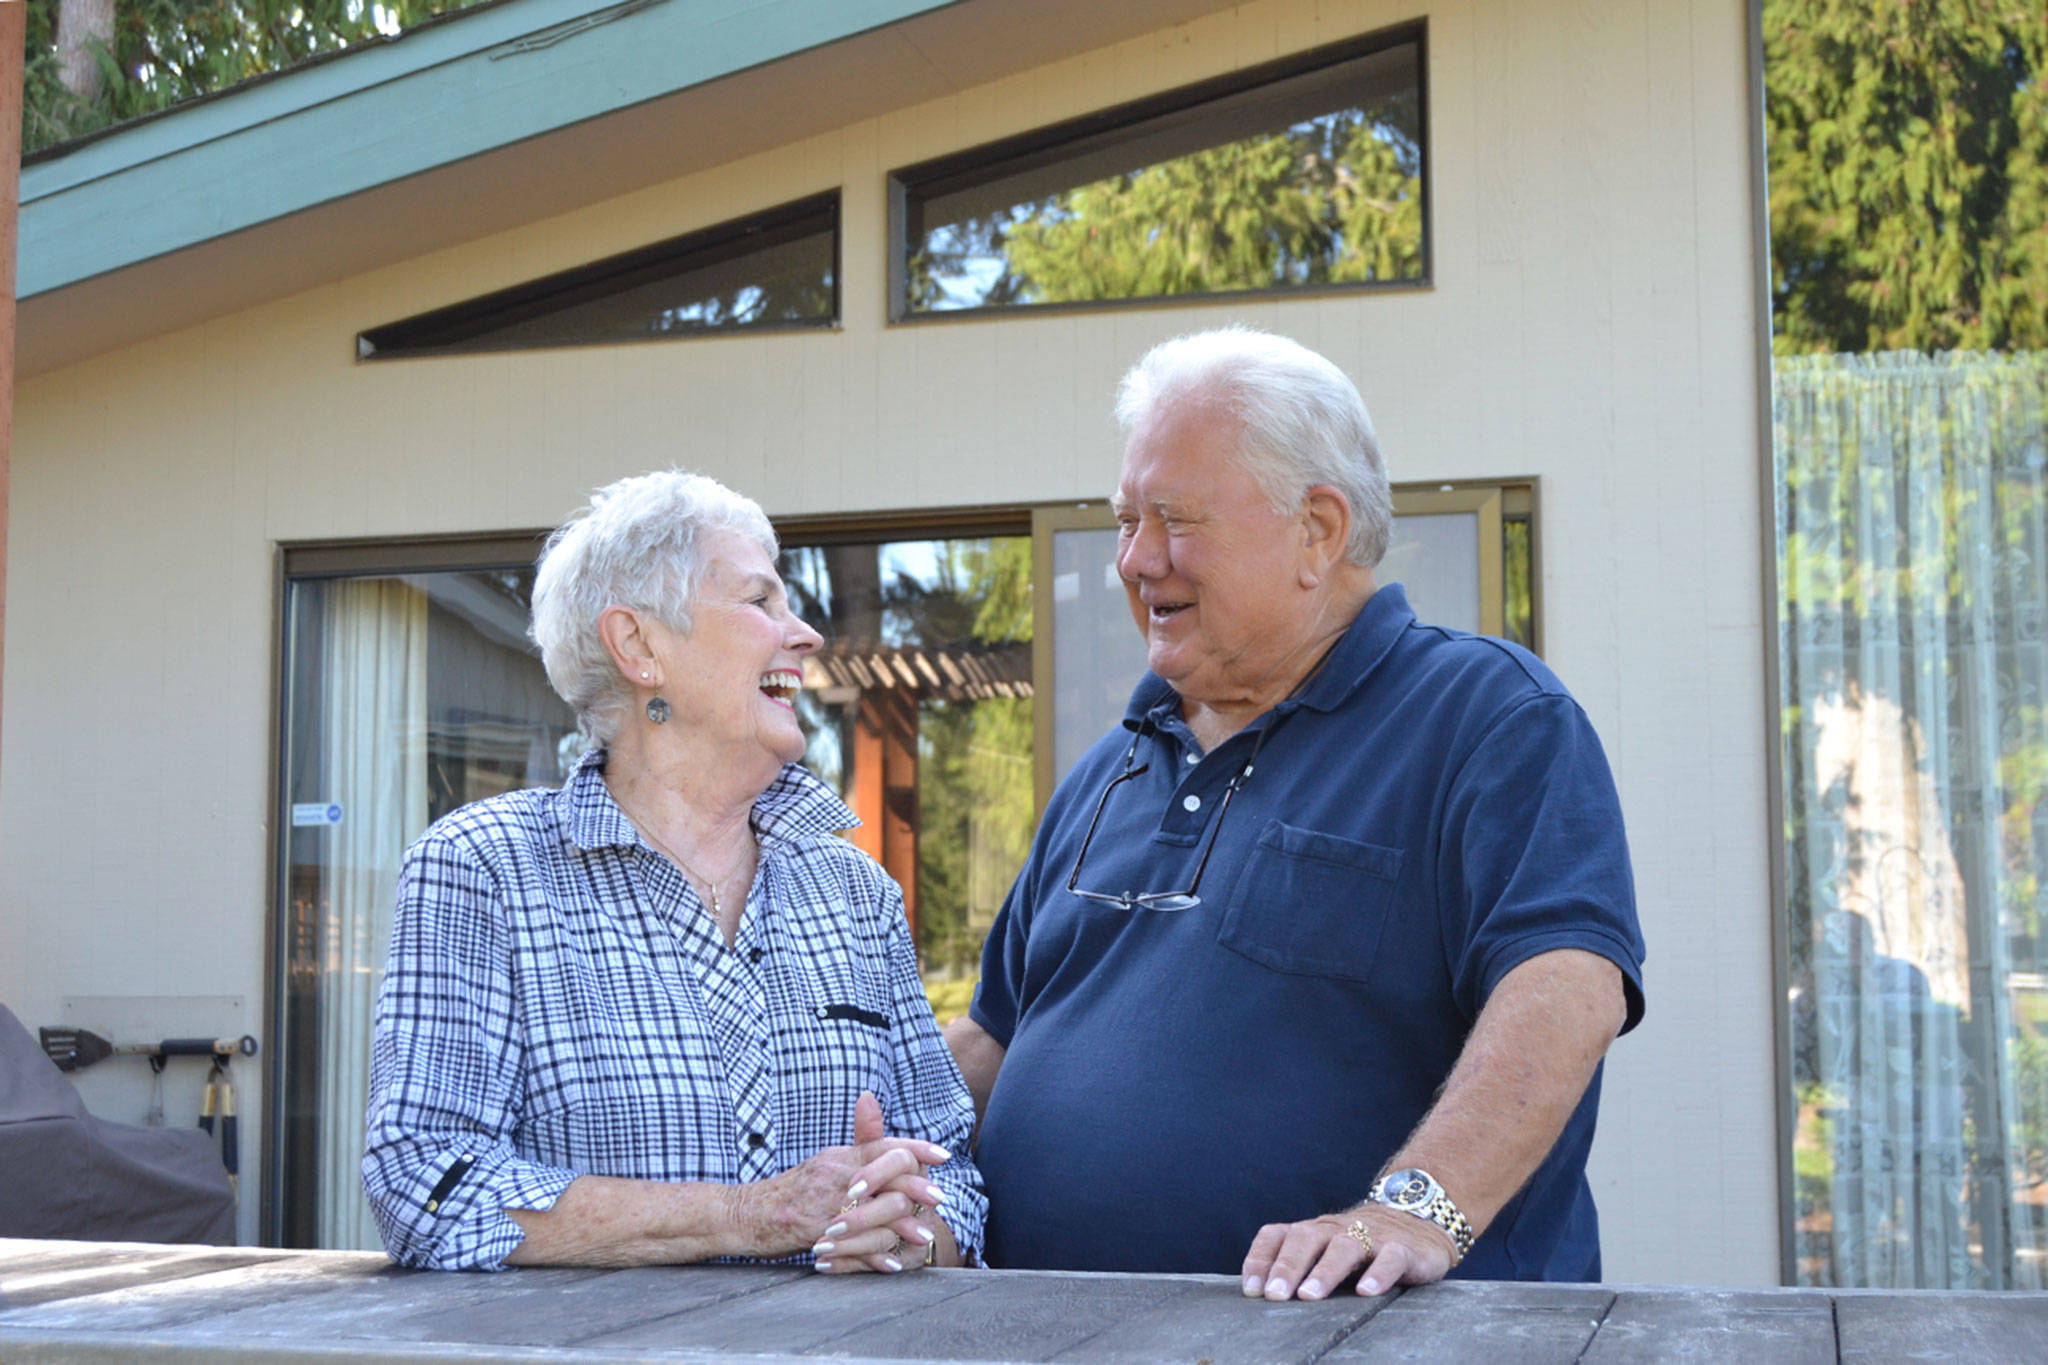 Matthew Nash/Olympic Peninsula News Group                                Vonnie and Pepper Putnam moved to Sunland 20-plus years ago and soon thereafter Vonnie was diagnosed with breast cancer. She’s since become an advocate for helping local women fight and recover from breast cancer.